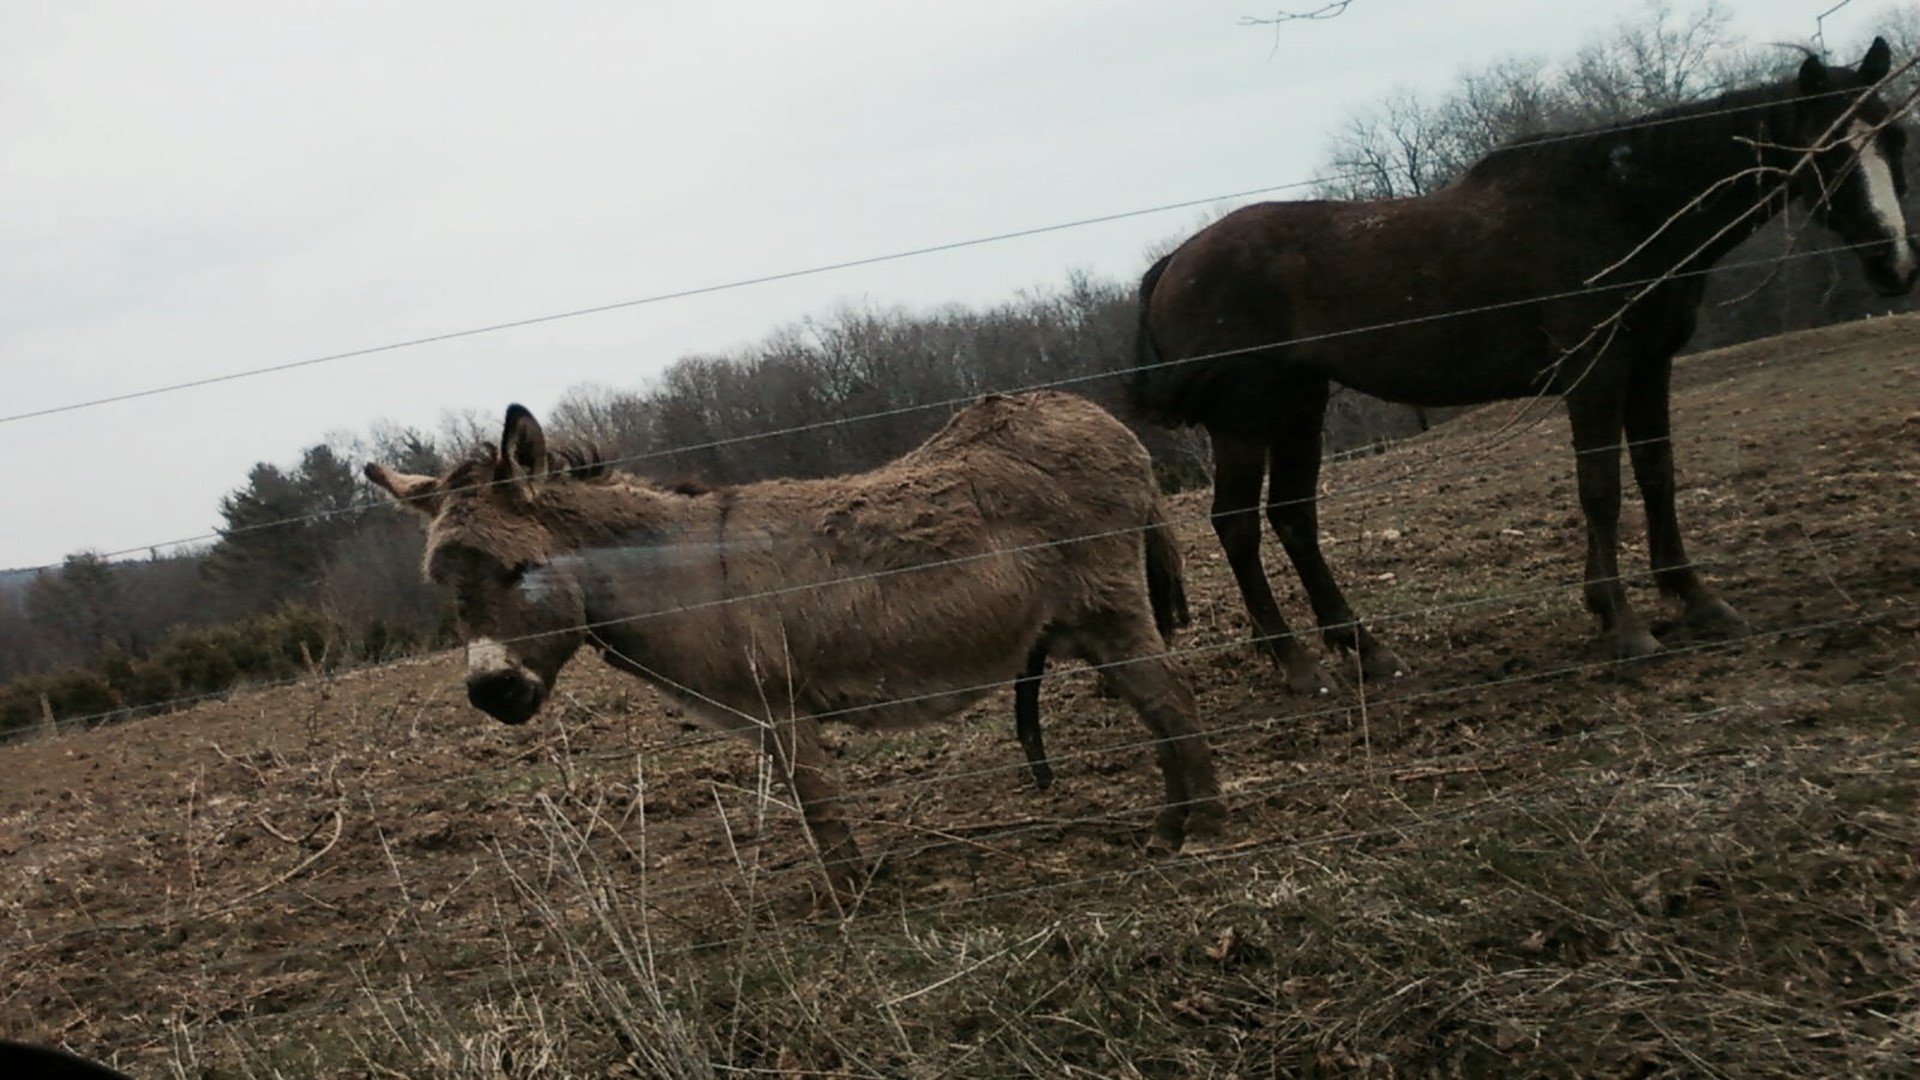 Teens Charged With Killing Donkey